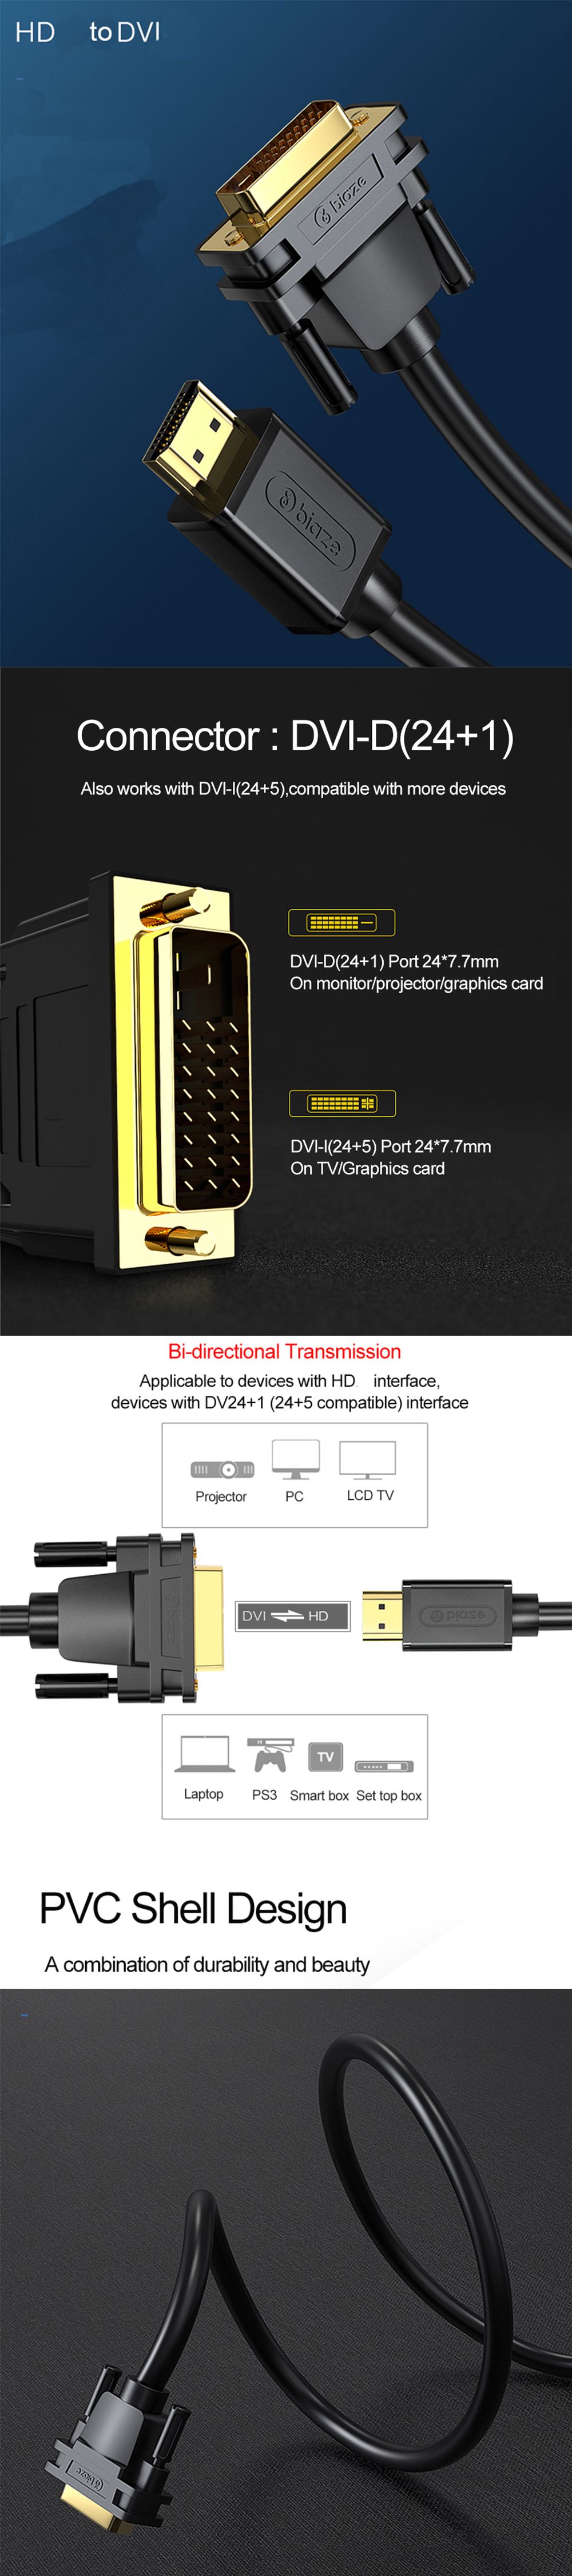 Biaze-HD-to-DVI241-Bidirectional-Transfers-Gold-Plated-Connector-Adapter-Video-Cable-for-HDTV-PC-Pro-1568112